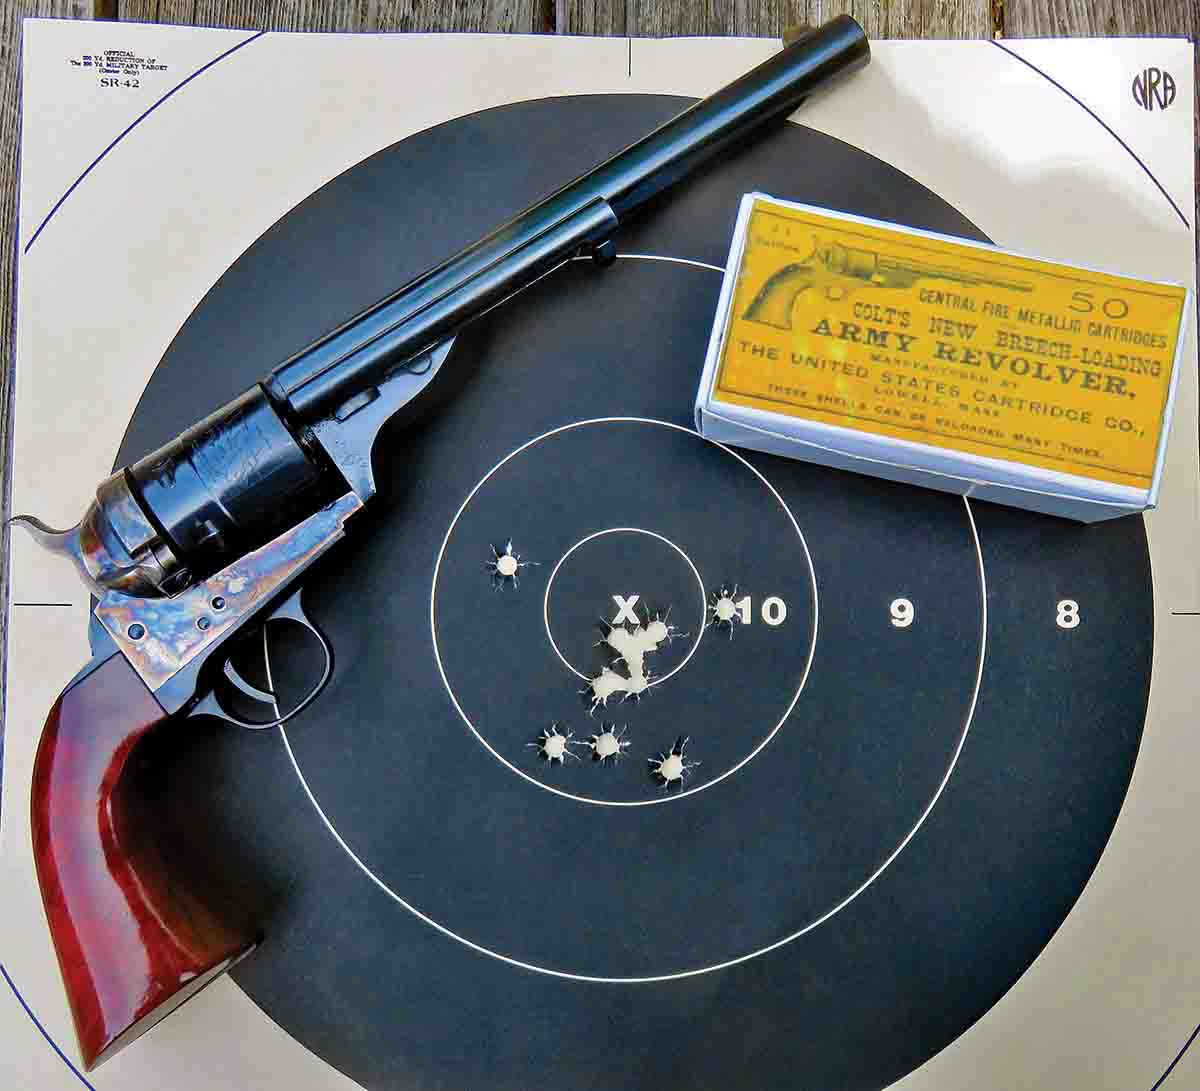 10 shots with Mike's .44 Colt by Cimarron Firearms shows a score of 100 with 5Xs